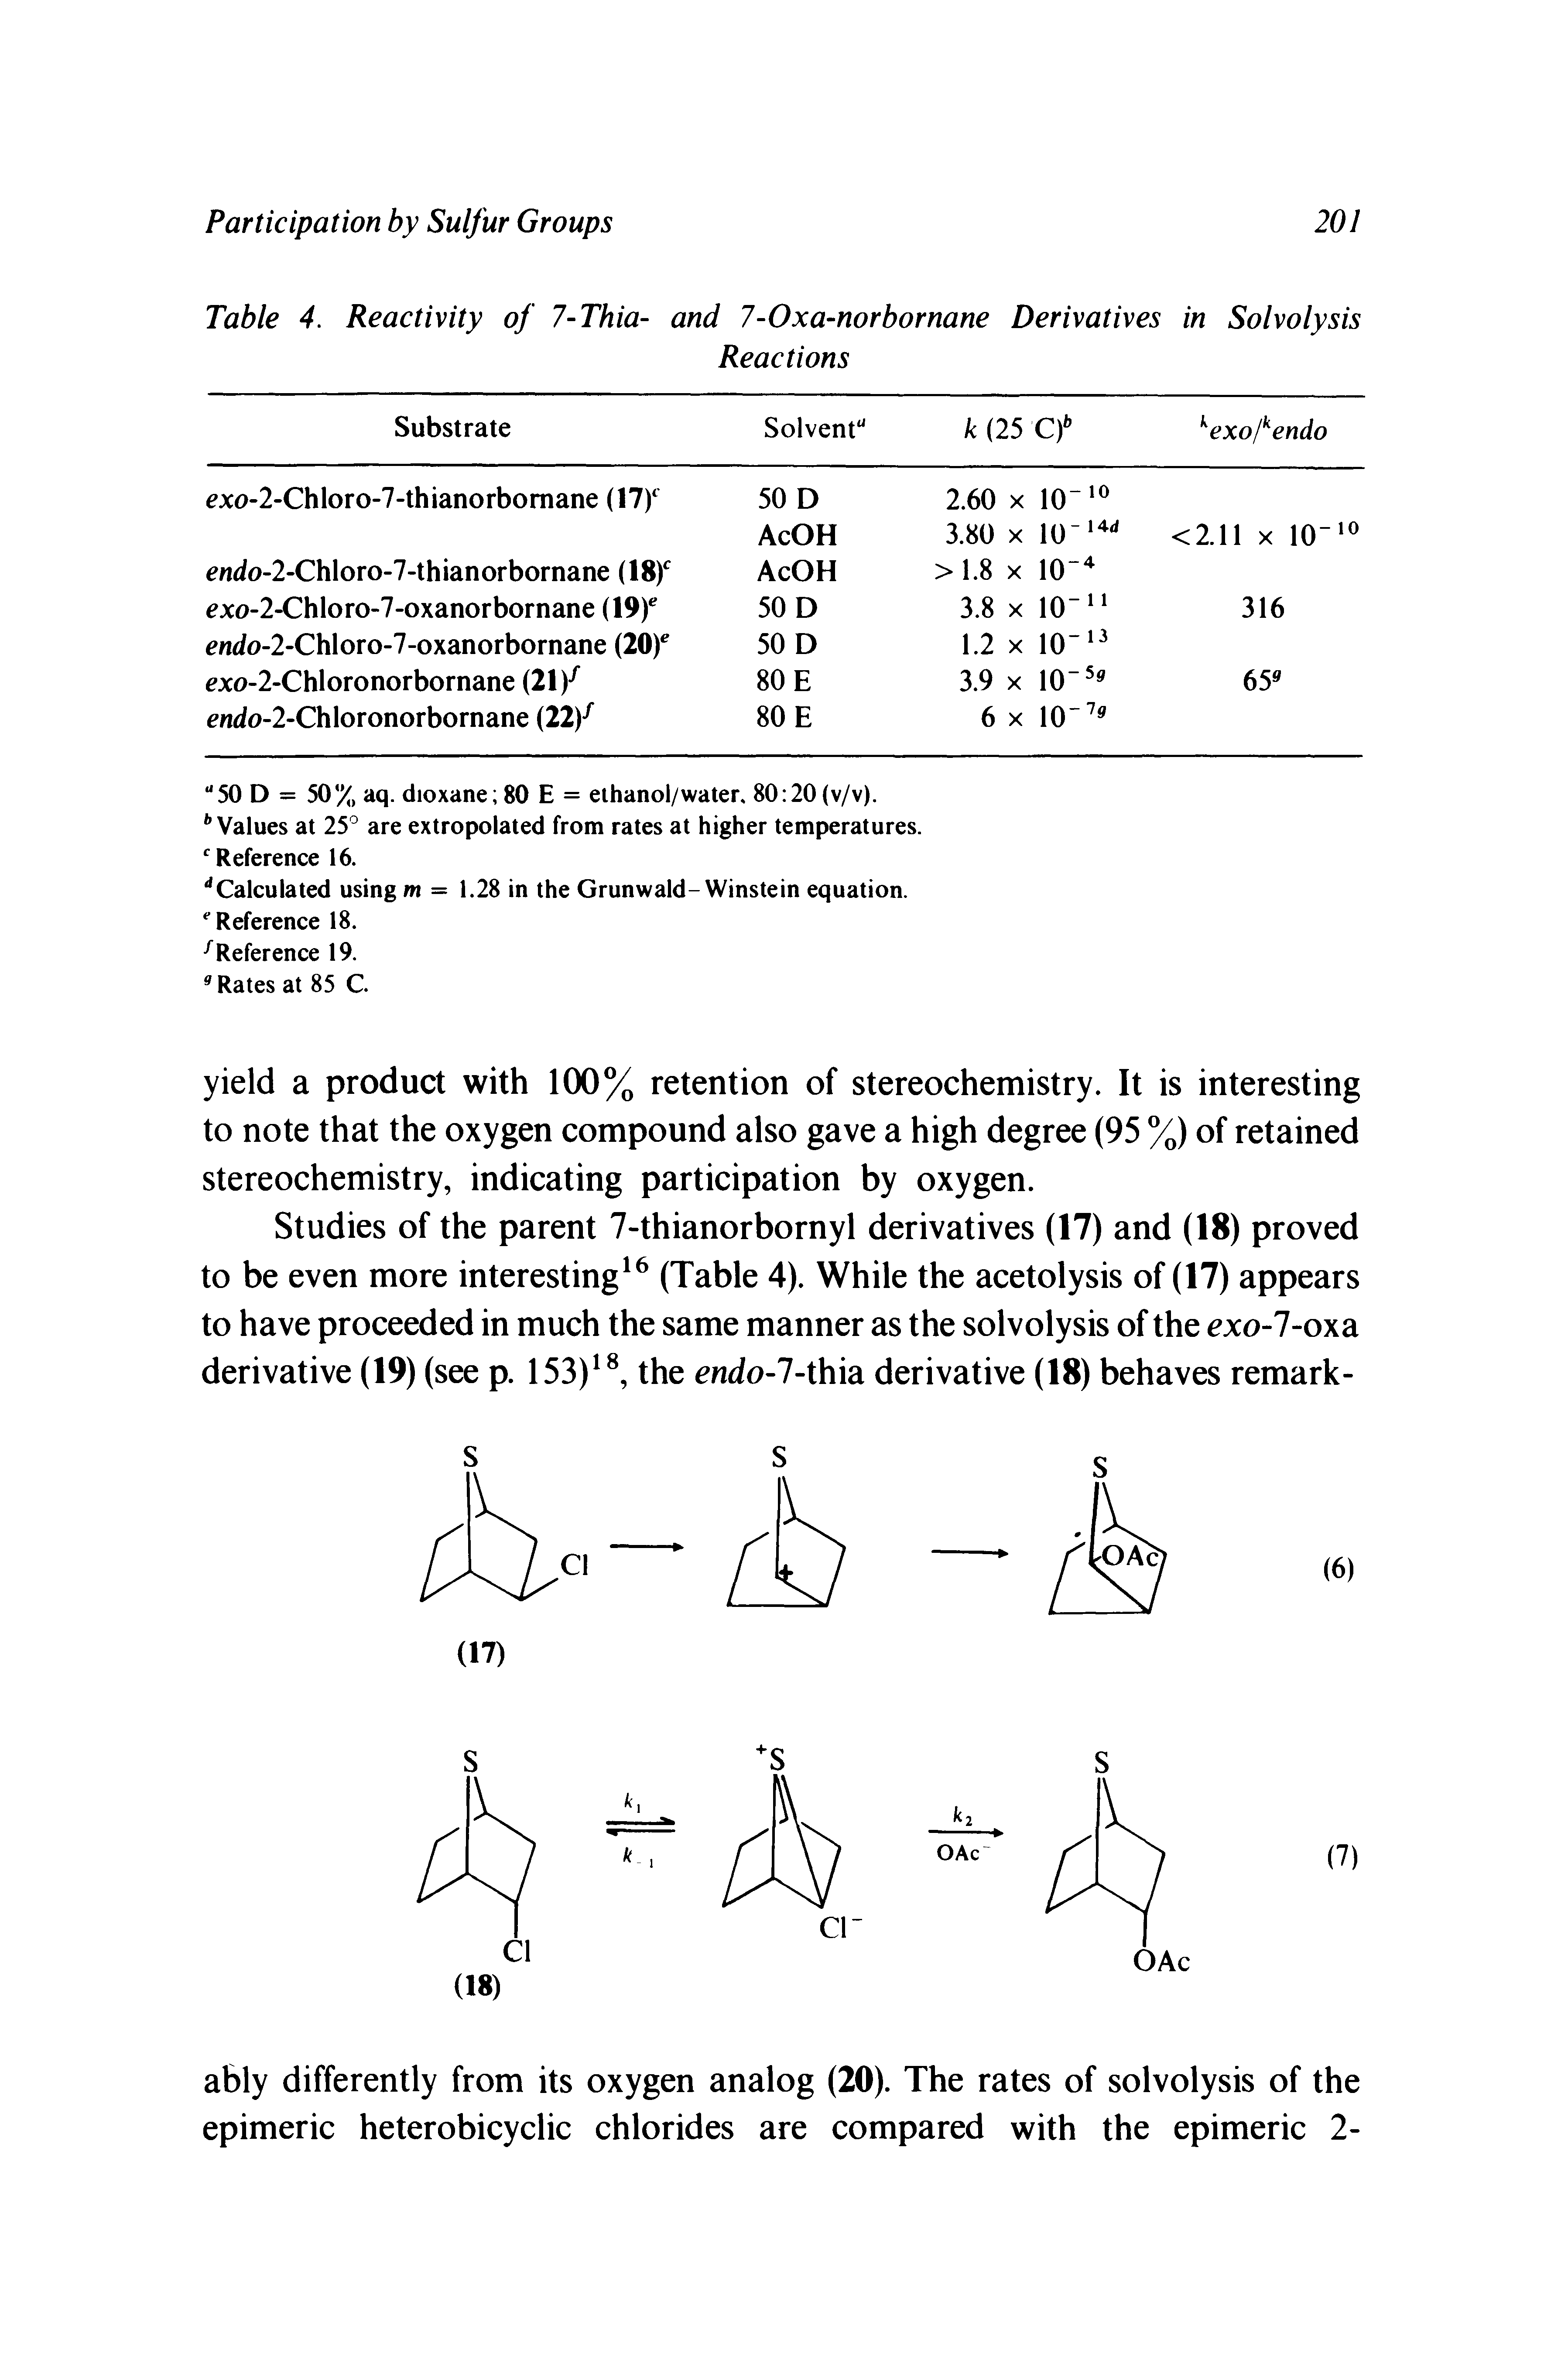 Table 4. Reactivity of 7-Thia- and 7-Oxa-norbornane Derivatives in Solvolysis...